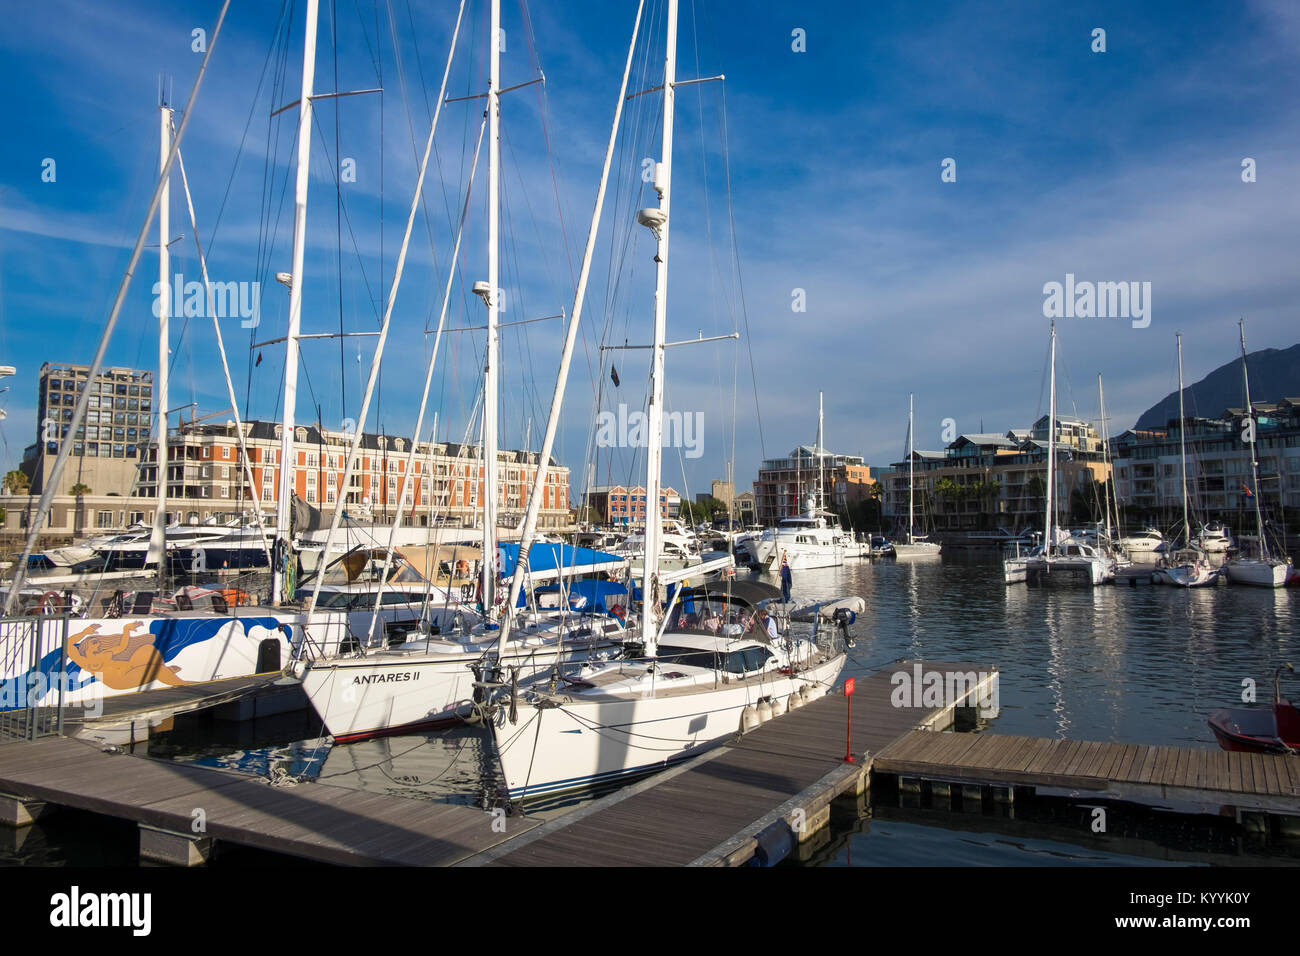 Boats in the marina at the V&A Waterfront, Cape Town, South Africa Stock Photo